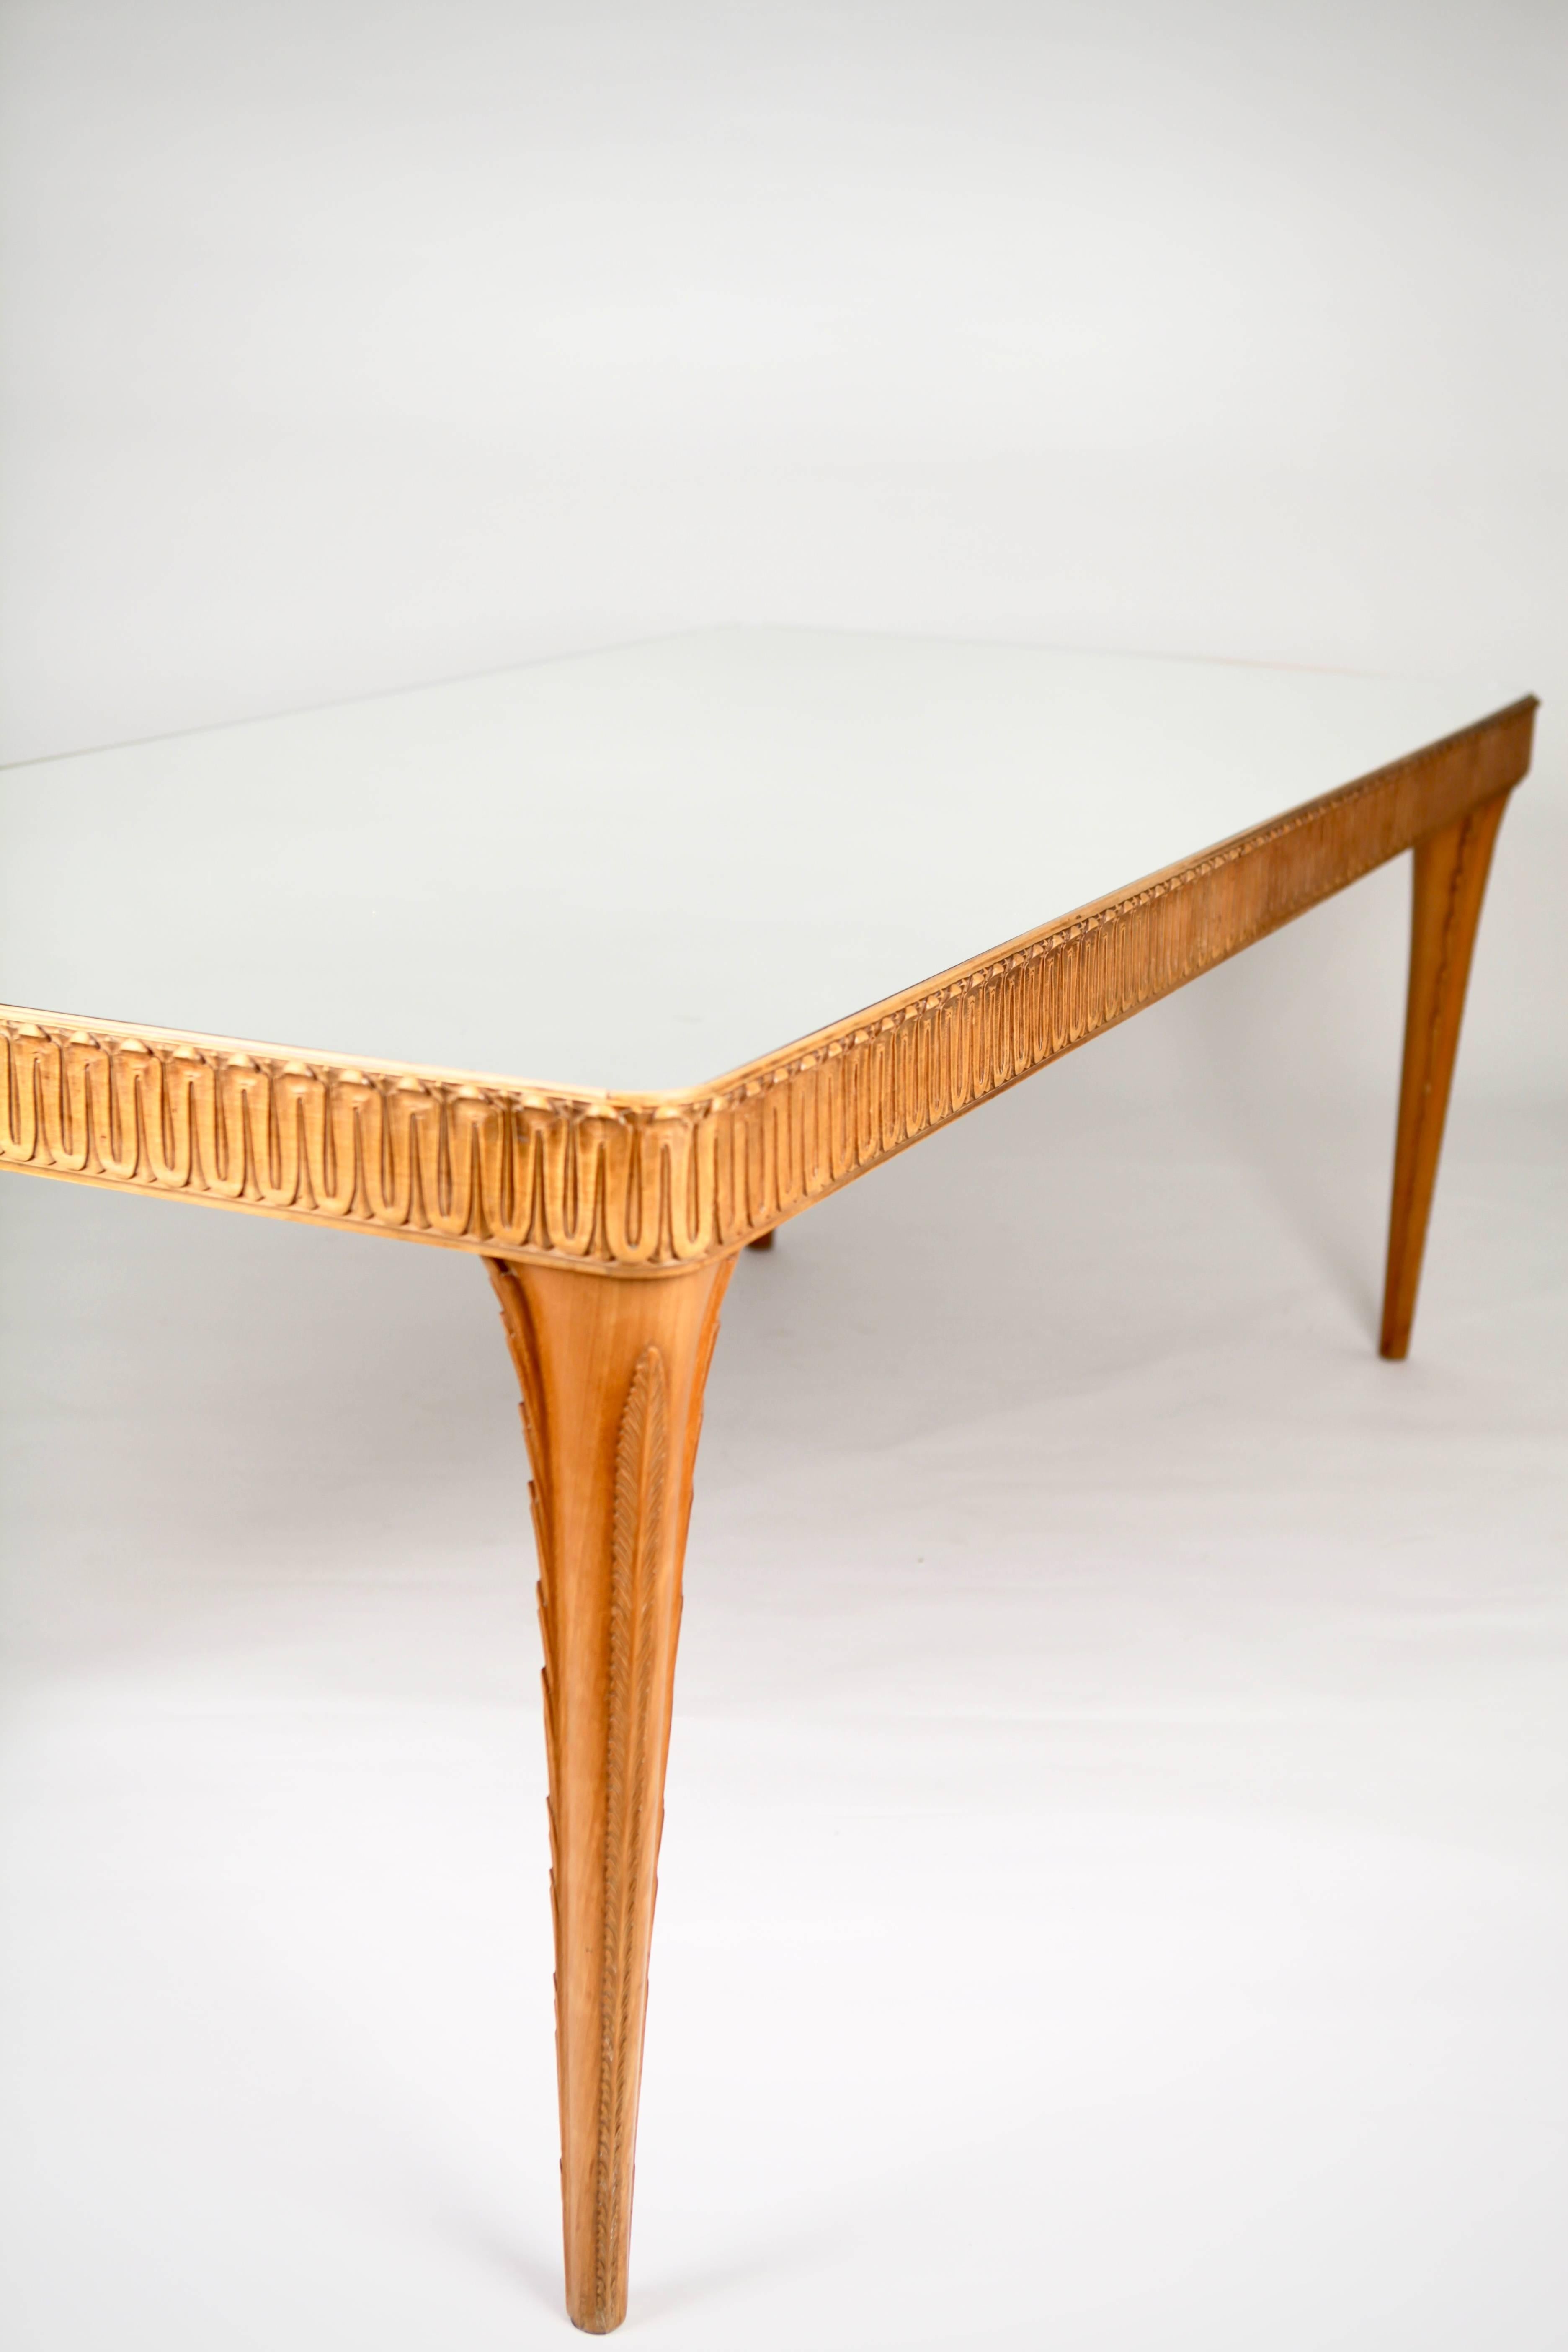 Stained Elegant Italian Carved Beech Dining Table, 1940s